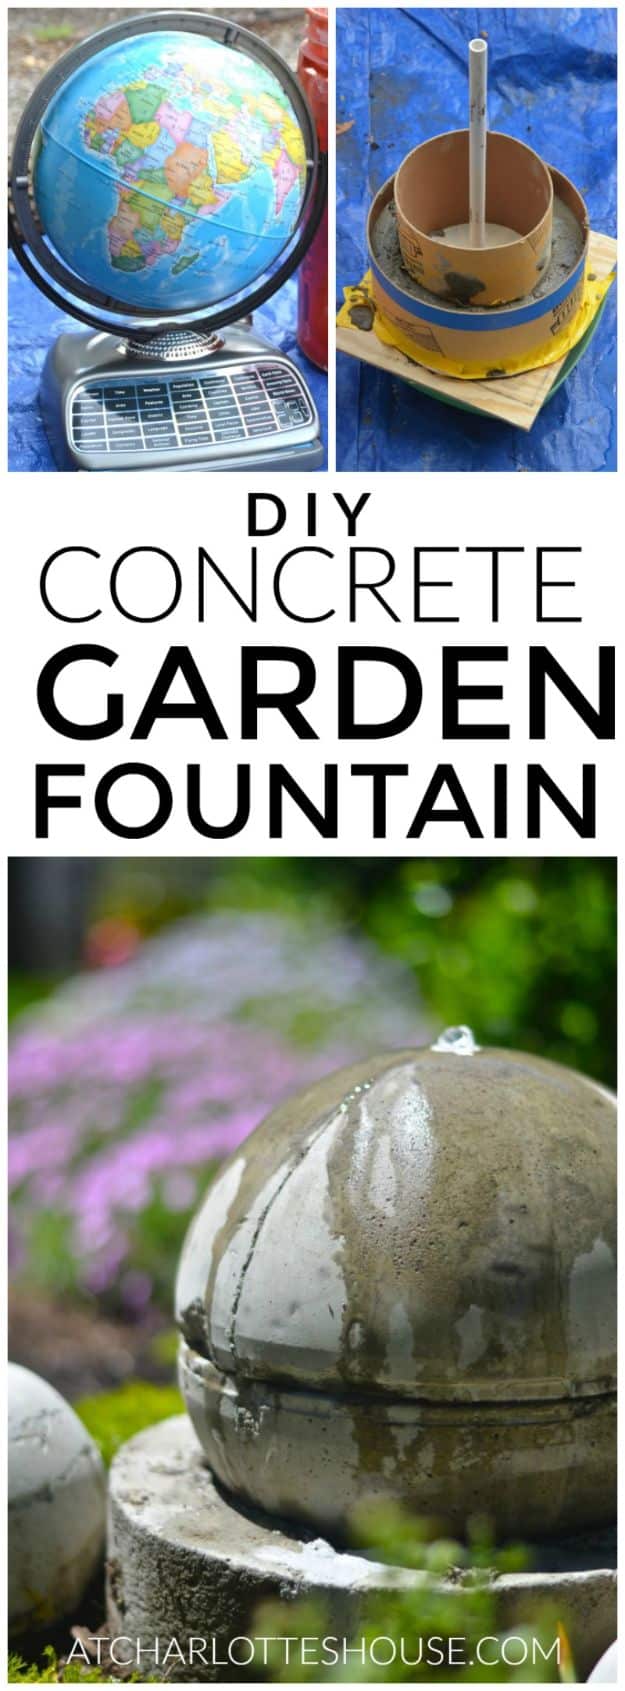 DIY Fountains - DIY Concrete Garden Fountain - Easy Ways to Make A Fountain in the Backyard - Do It Yourself Projects for the Garden - DIY Home Improvement on a Budget - Step by Step DIY Tutorials With Instructions http://diyjoy.com/diy-fountains